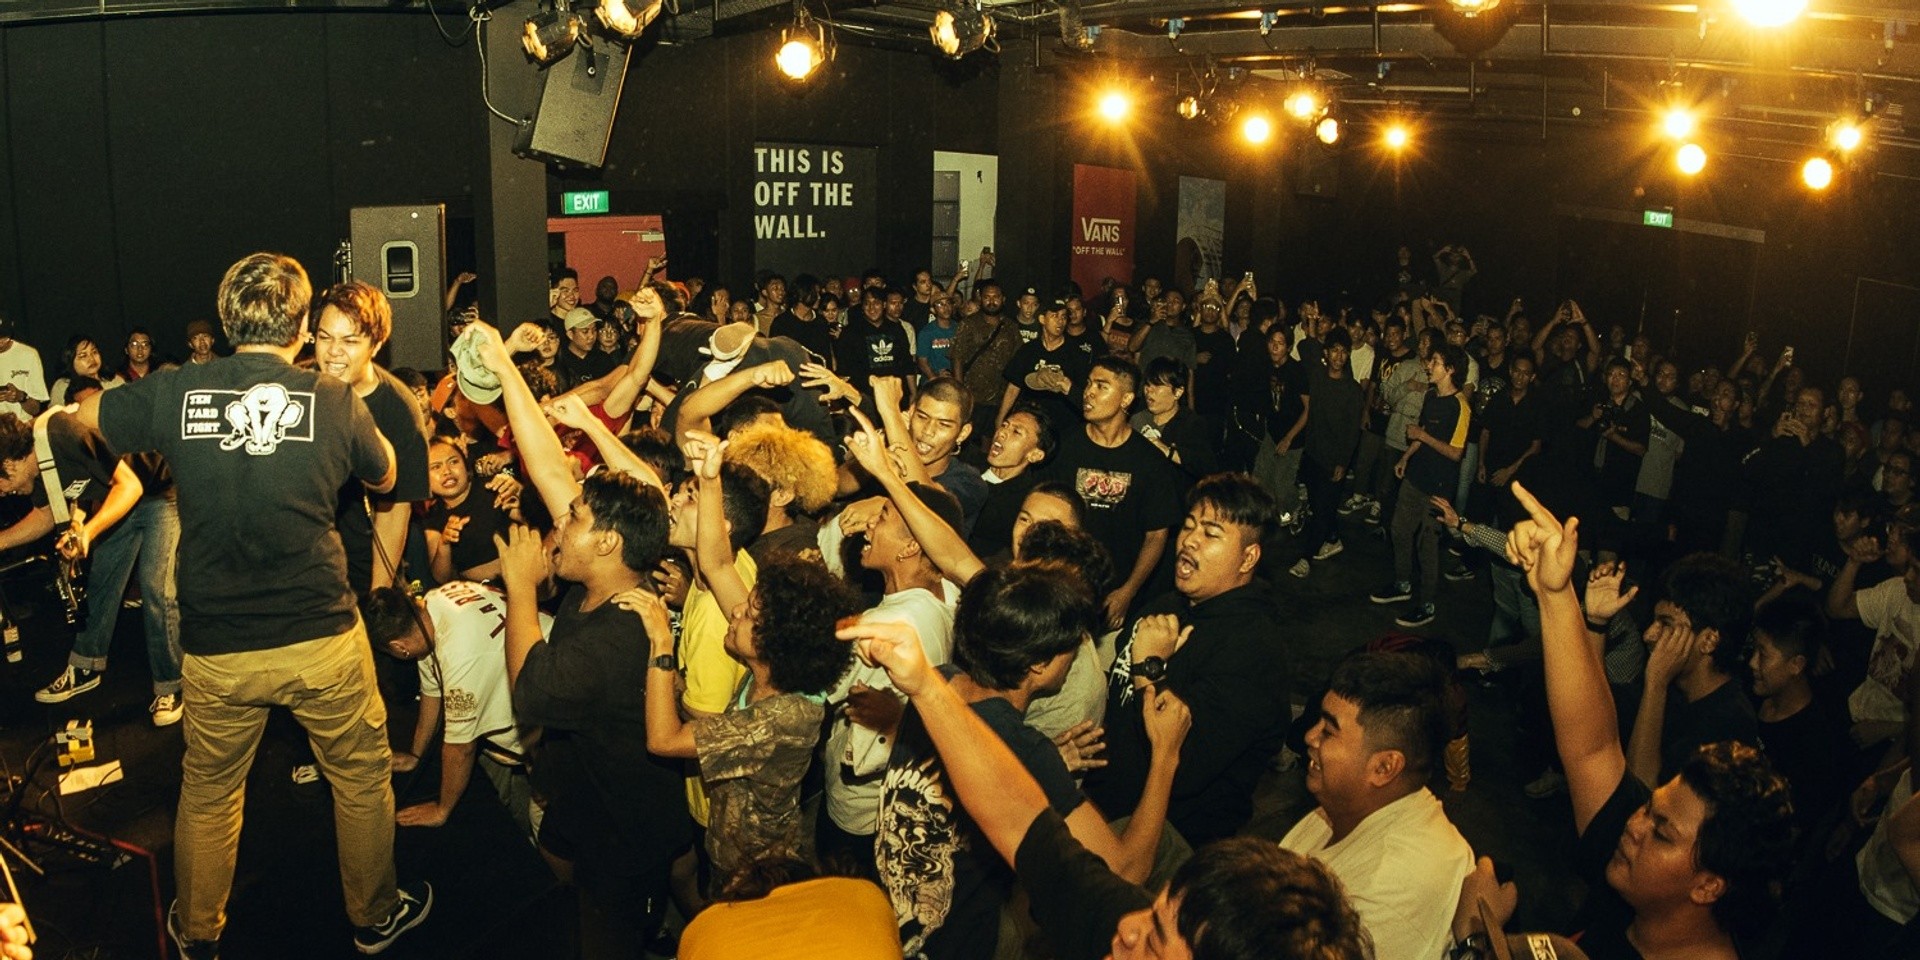 The story of Vans Musicians Wanted: how a music competition became a movement to support local music scenes in Asia